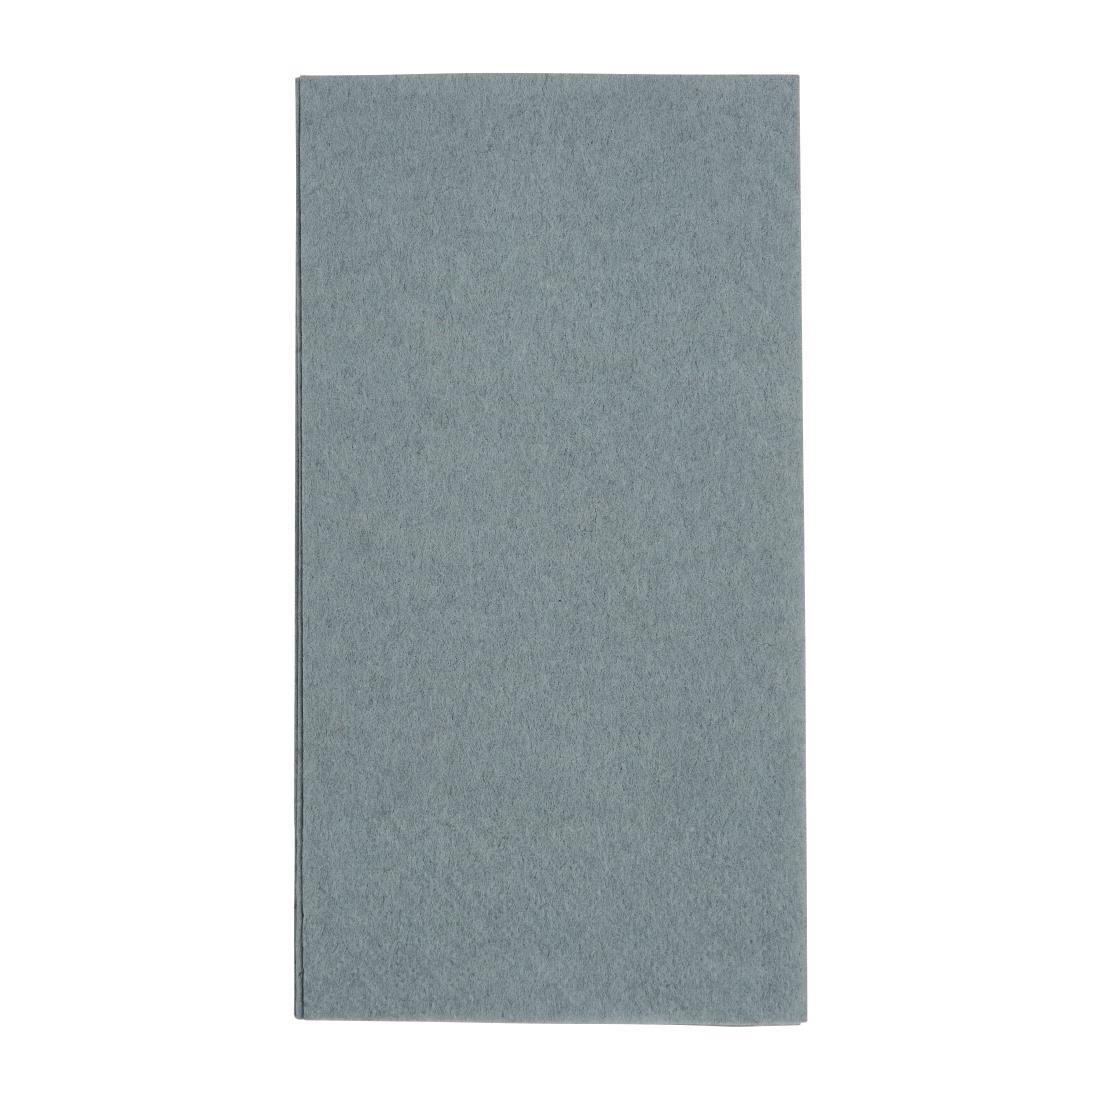 Fiesta Recyclable Lunch Napkin Grey 33x33cm 2ply 1/8 Fold (Pack of 2000) - FE231  - 1